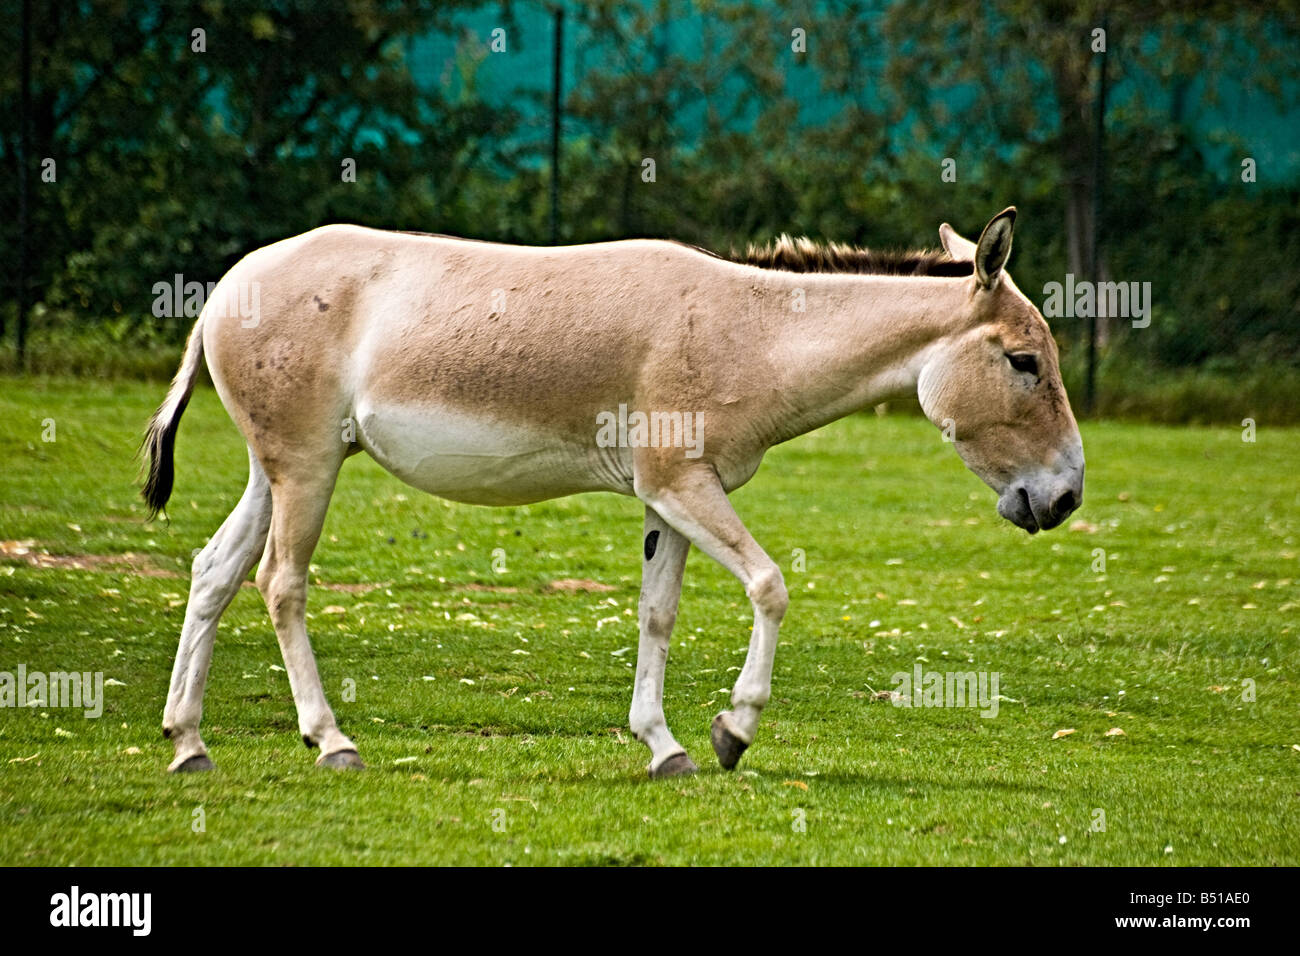 An onager or wild donkey Stock Photo